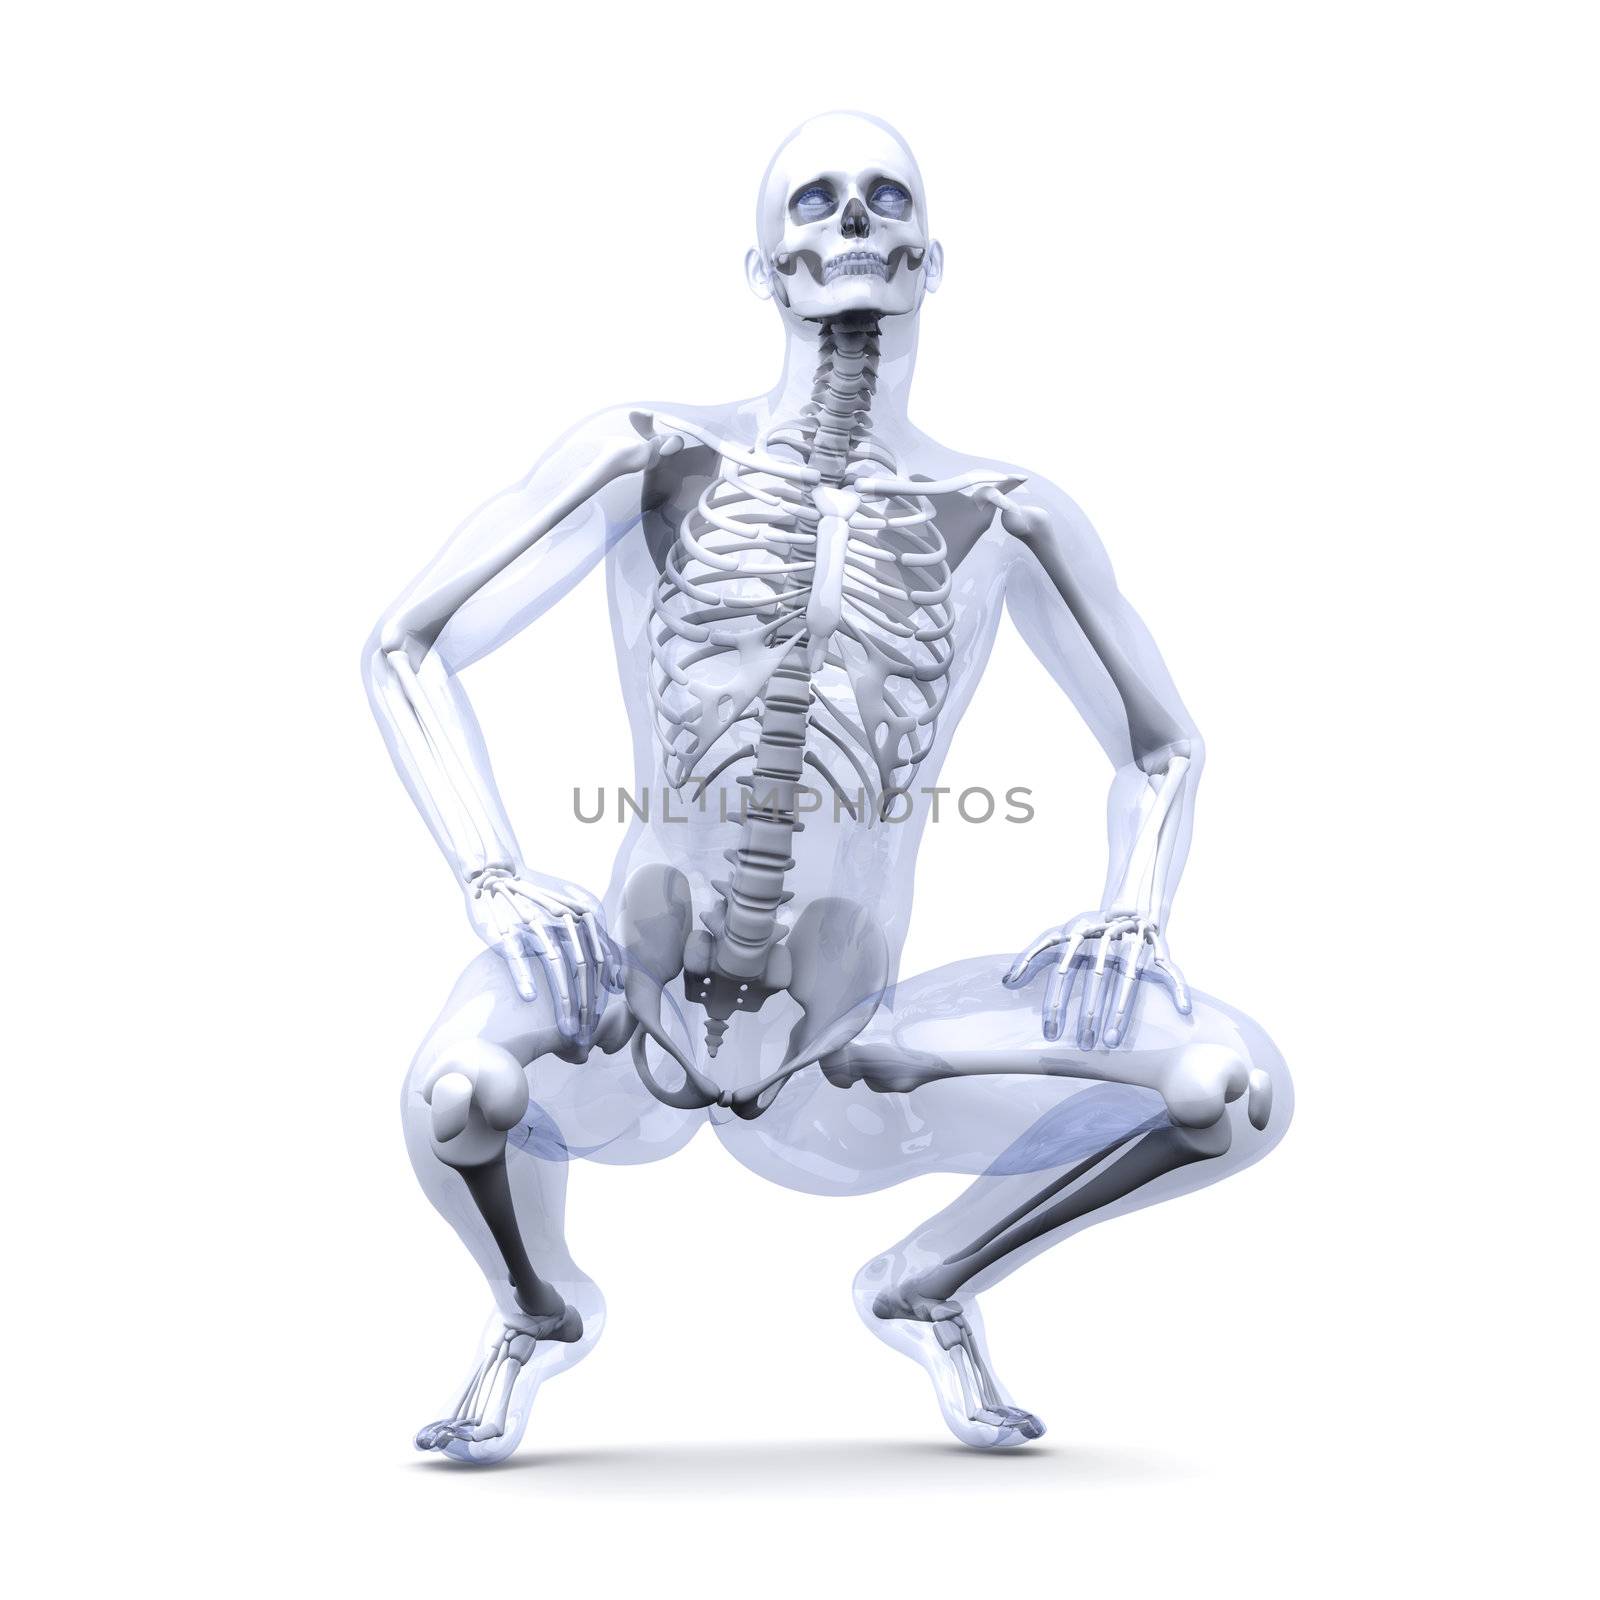 A medical visualization of human anatomy. 3D rendered Illustration. Isolated on white.